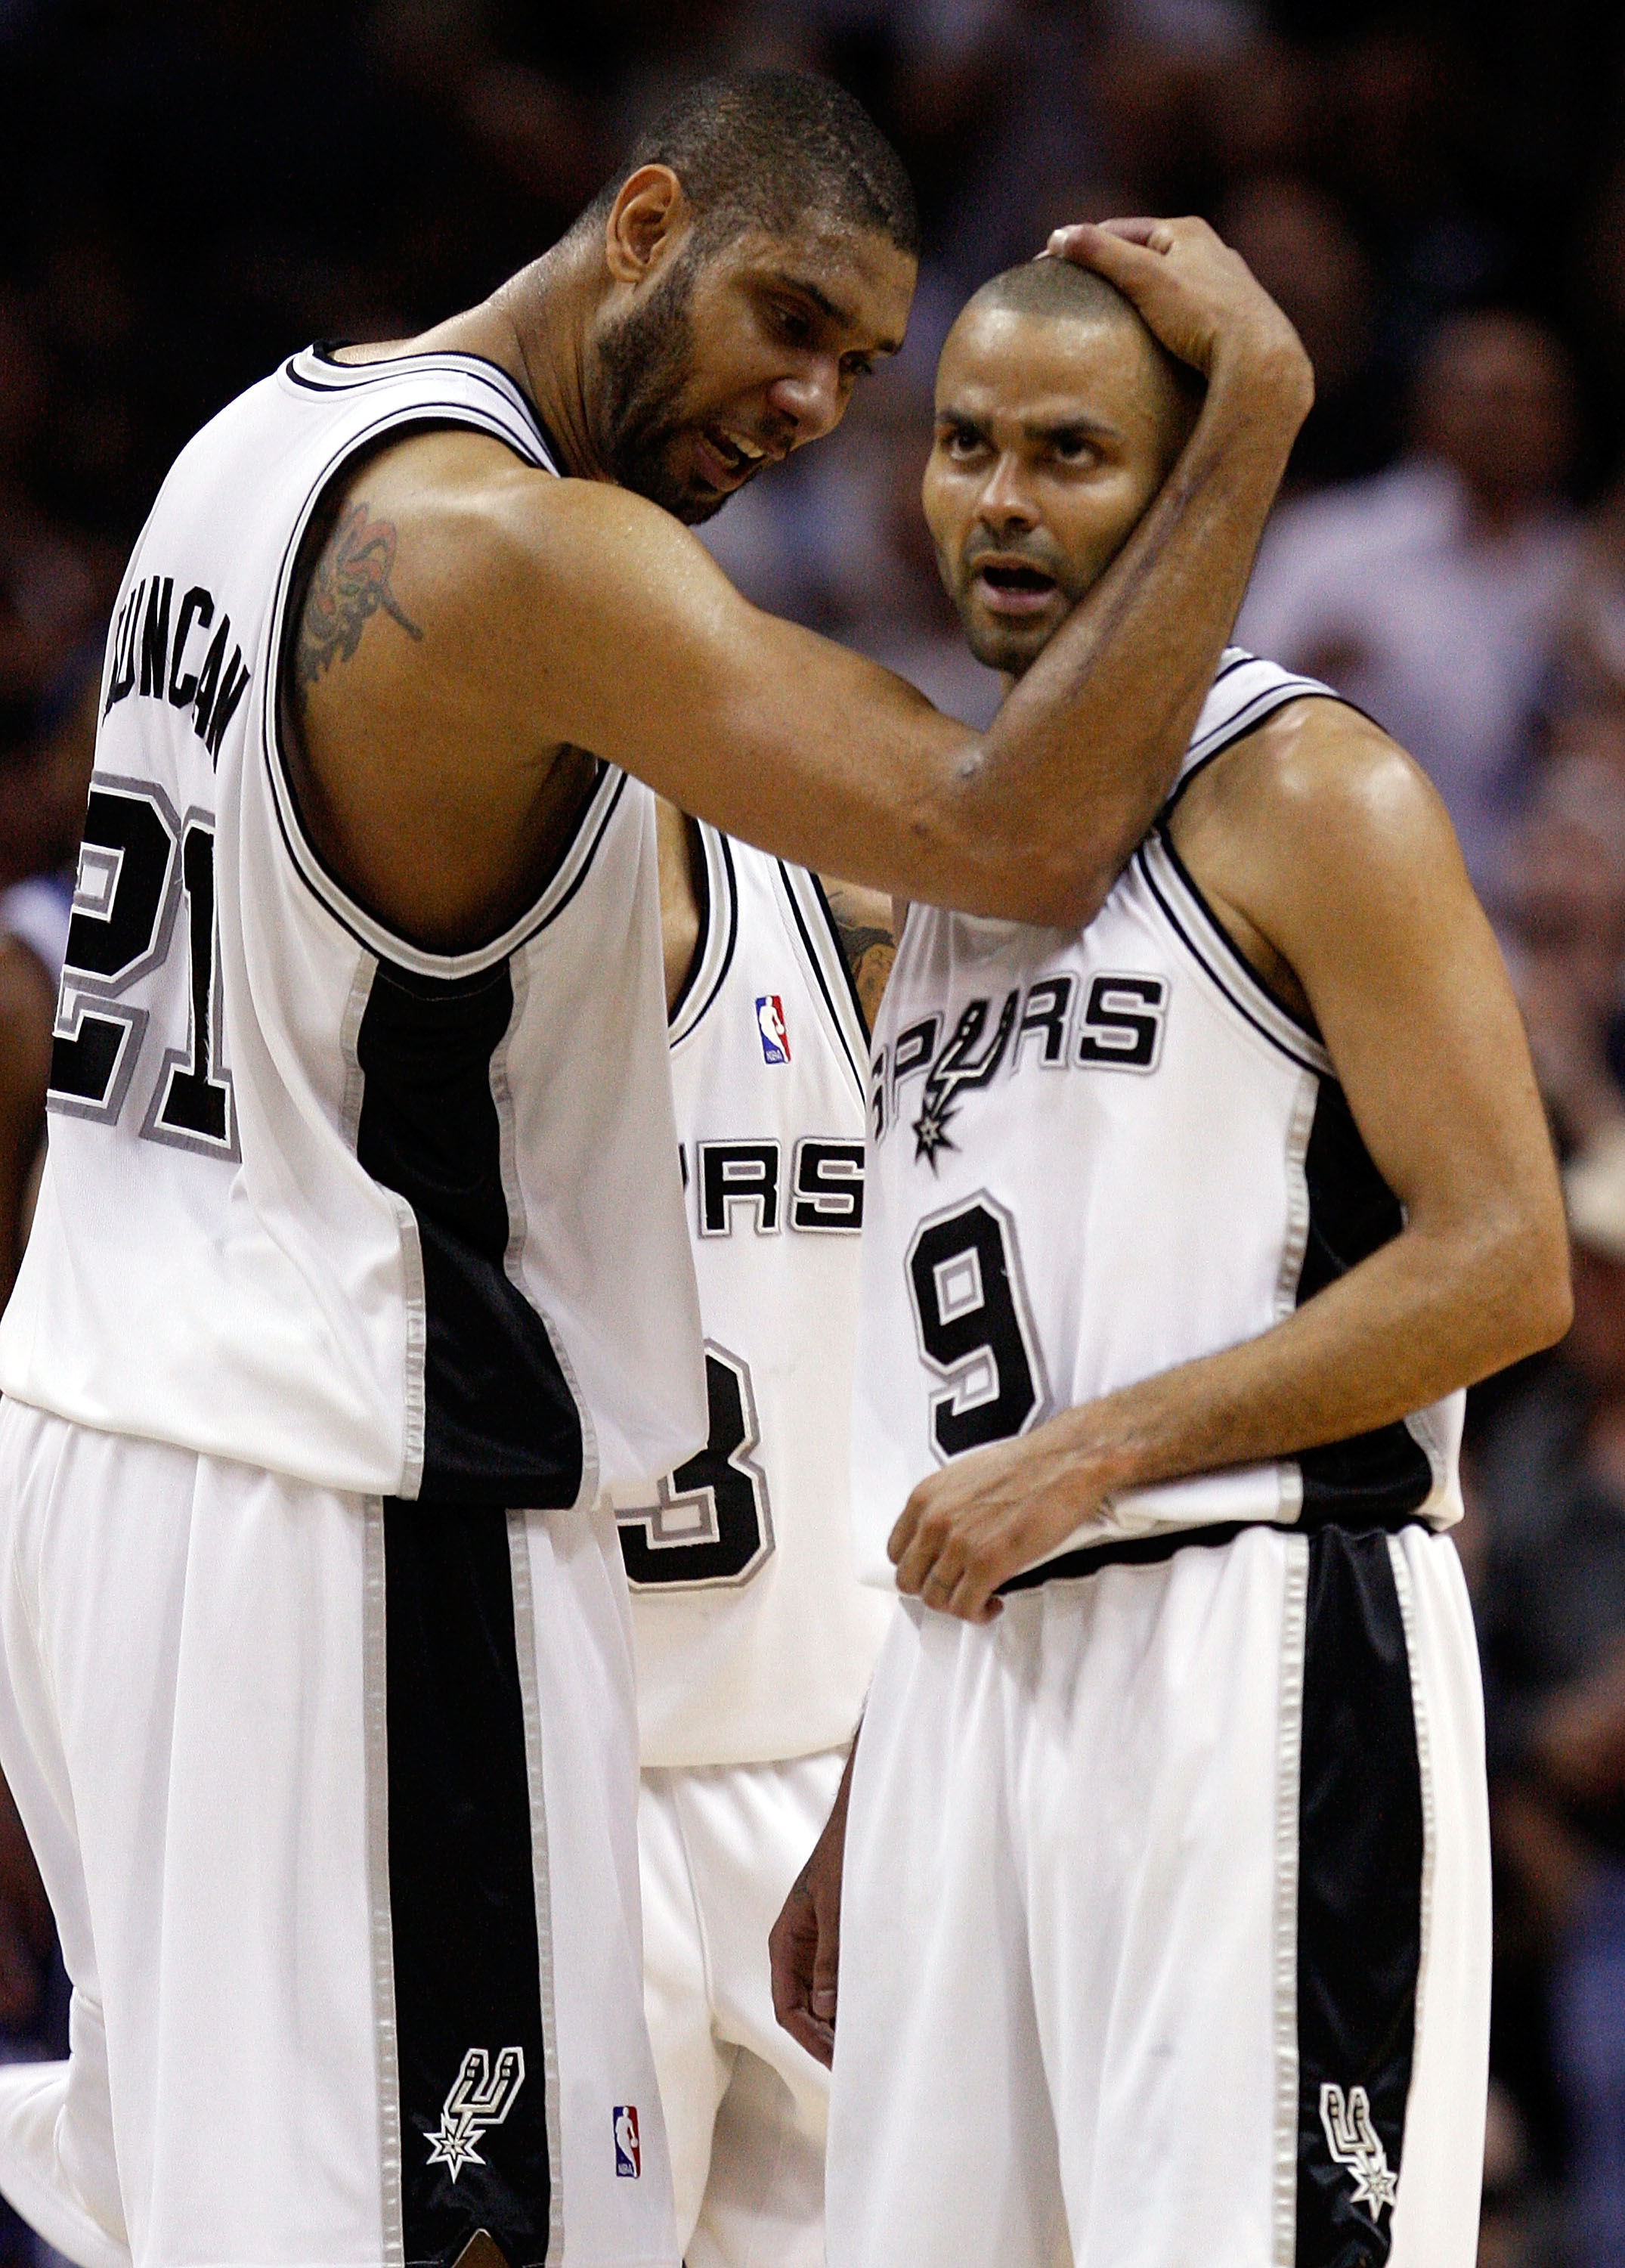 SAN ANTONIO - APRIL 23:  Forward Tim Duncan #21 and Tony Parker #9 of the San Antonio Spurs react during a 94-90 win against the Dallas Mavericks in Game Three of the Western Conference Quarterfinals during the 2010 NBA Playoffs at AT&T Center on April 23